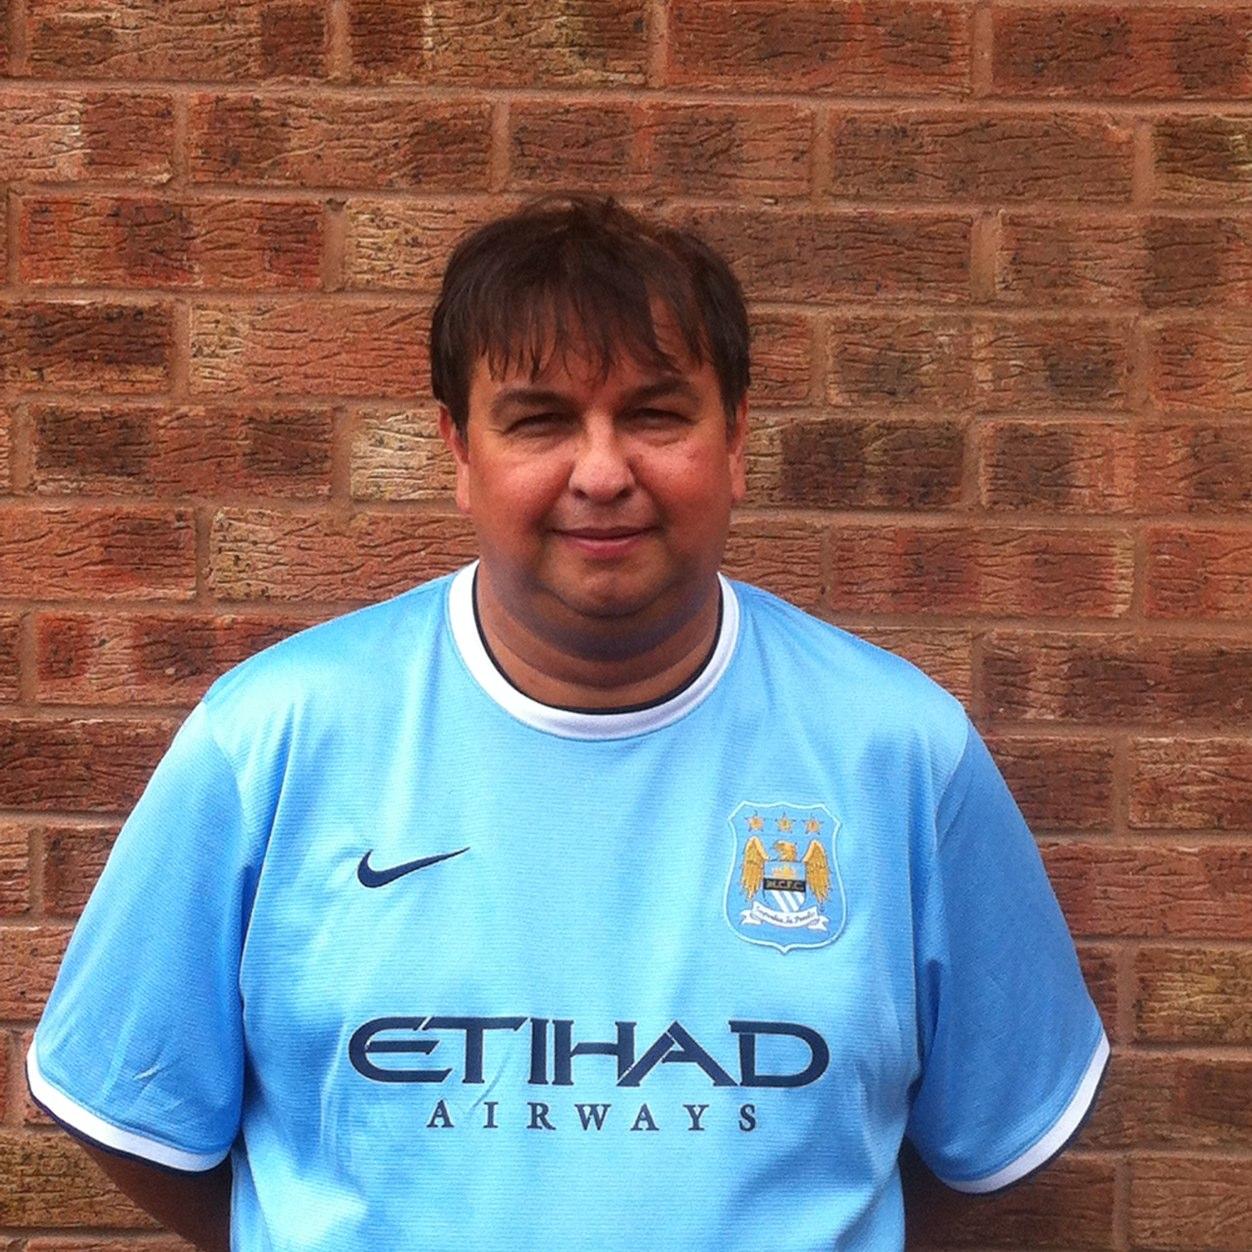 Living the dream, enjoying family life. Followed Manchester City since '80, loving the ride after many years of severe turbulence & editor of MCIVTA newsletter.